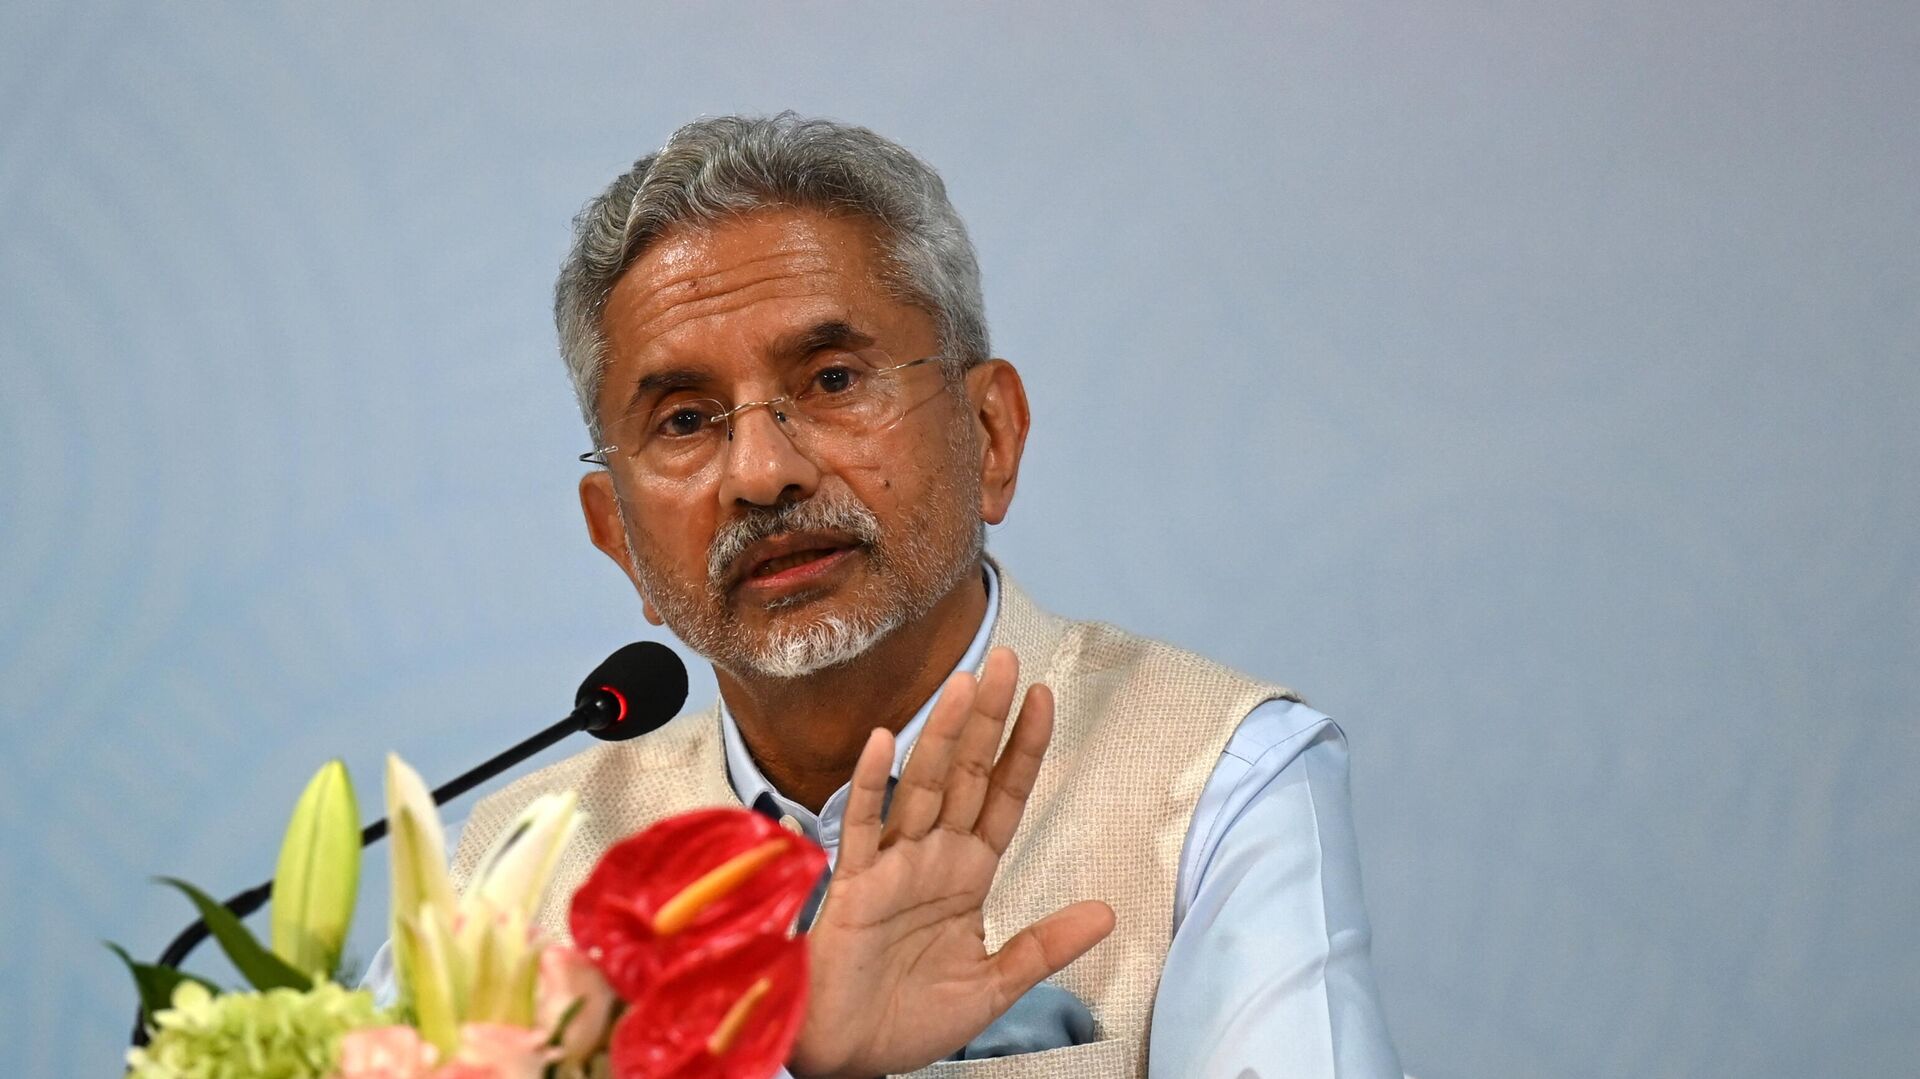 India's Foreign Minister Subrahmanyam Jaishankar gestures as he speaks during a news conference at the media centre for the Shanghai Cooperation Organization (SCO) meeting in Benaulim on May 5, 2023. (Photo by Punit PARANJPE / AFP) - Sputnik भारत, 1920, 17.12.2023